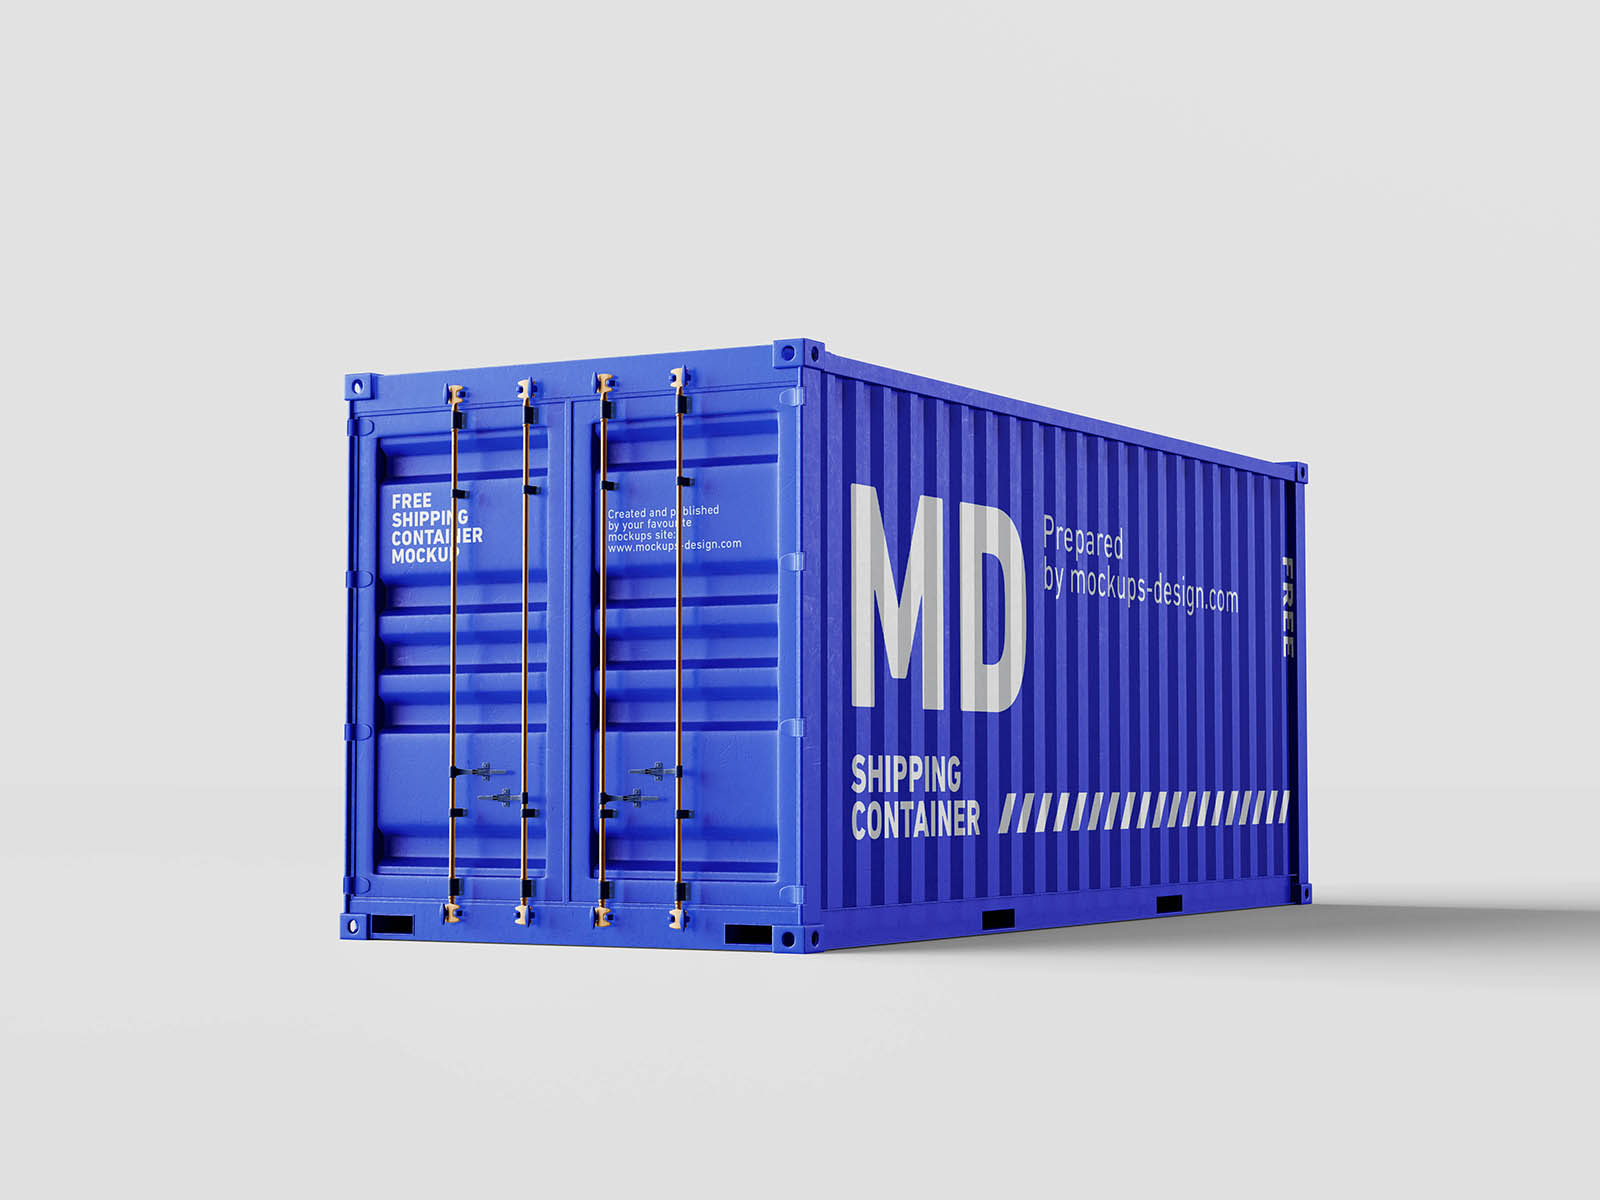 Free Shipping Container Mockup PSD Set